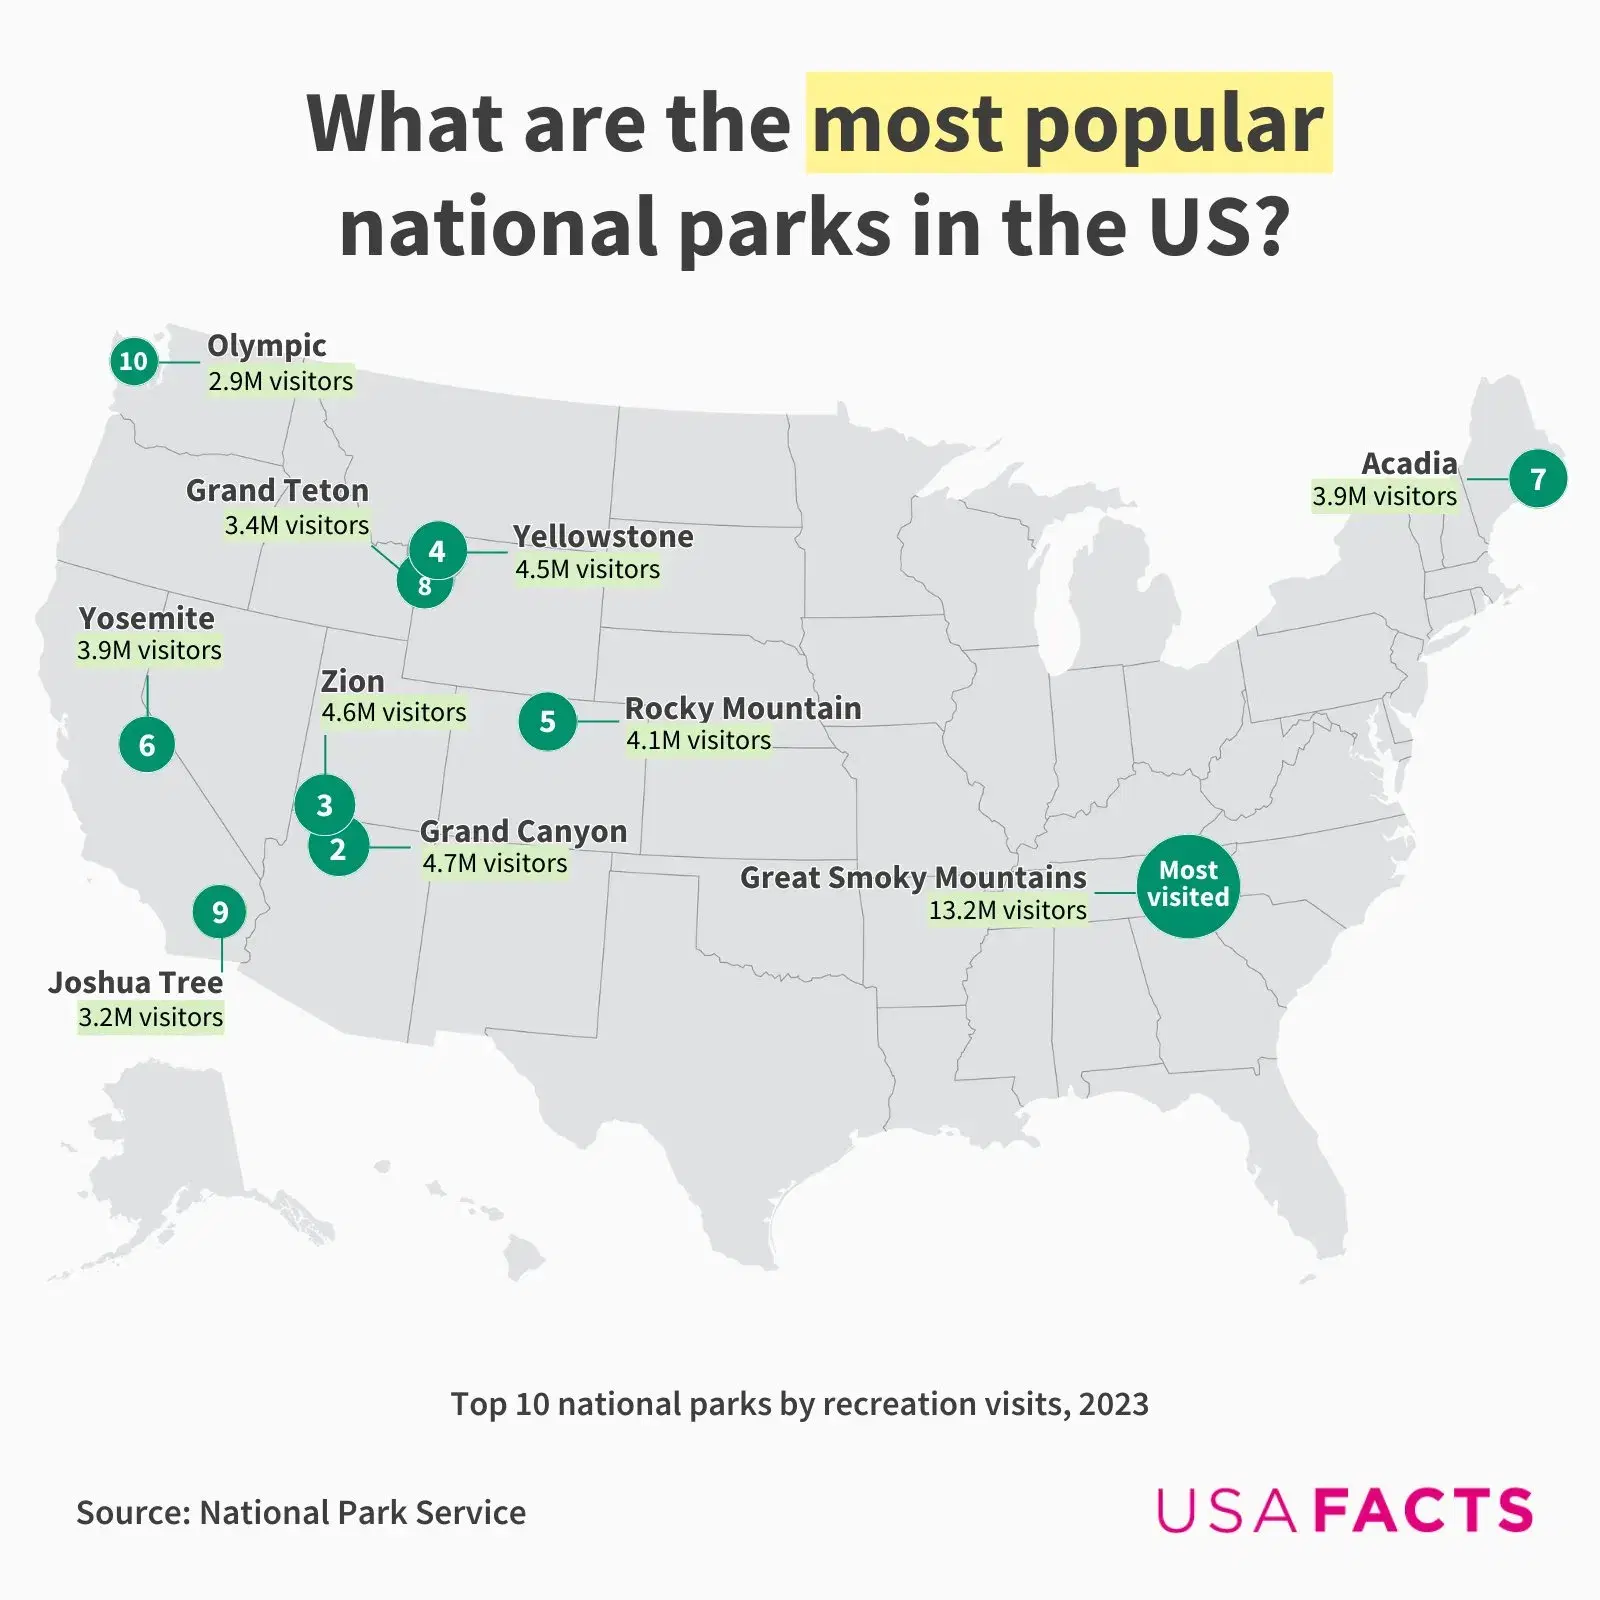 The top 10 most popular national parks in the US